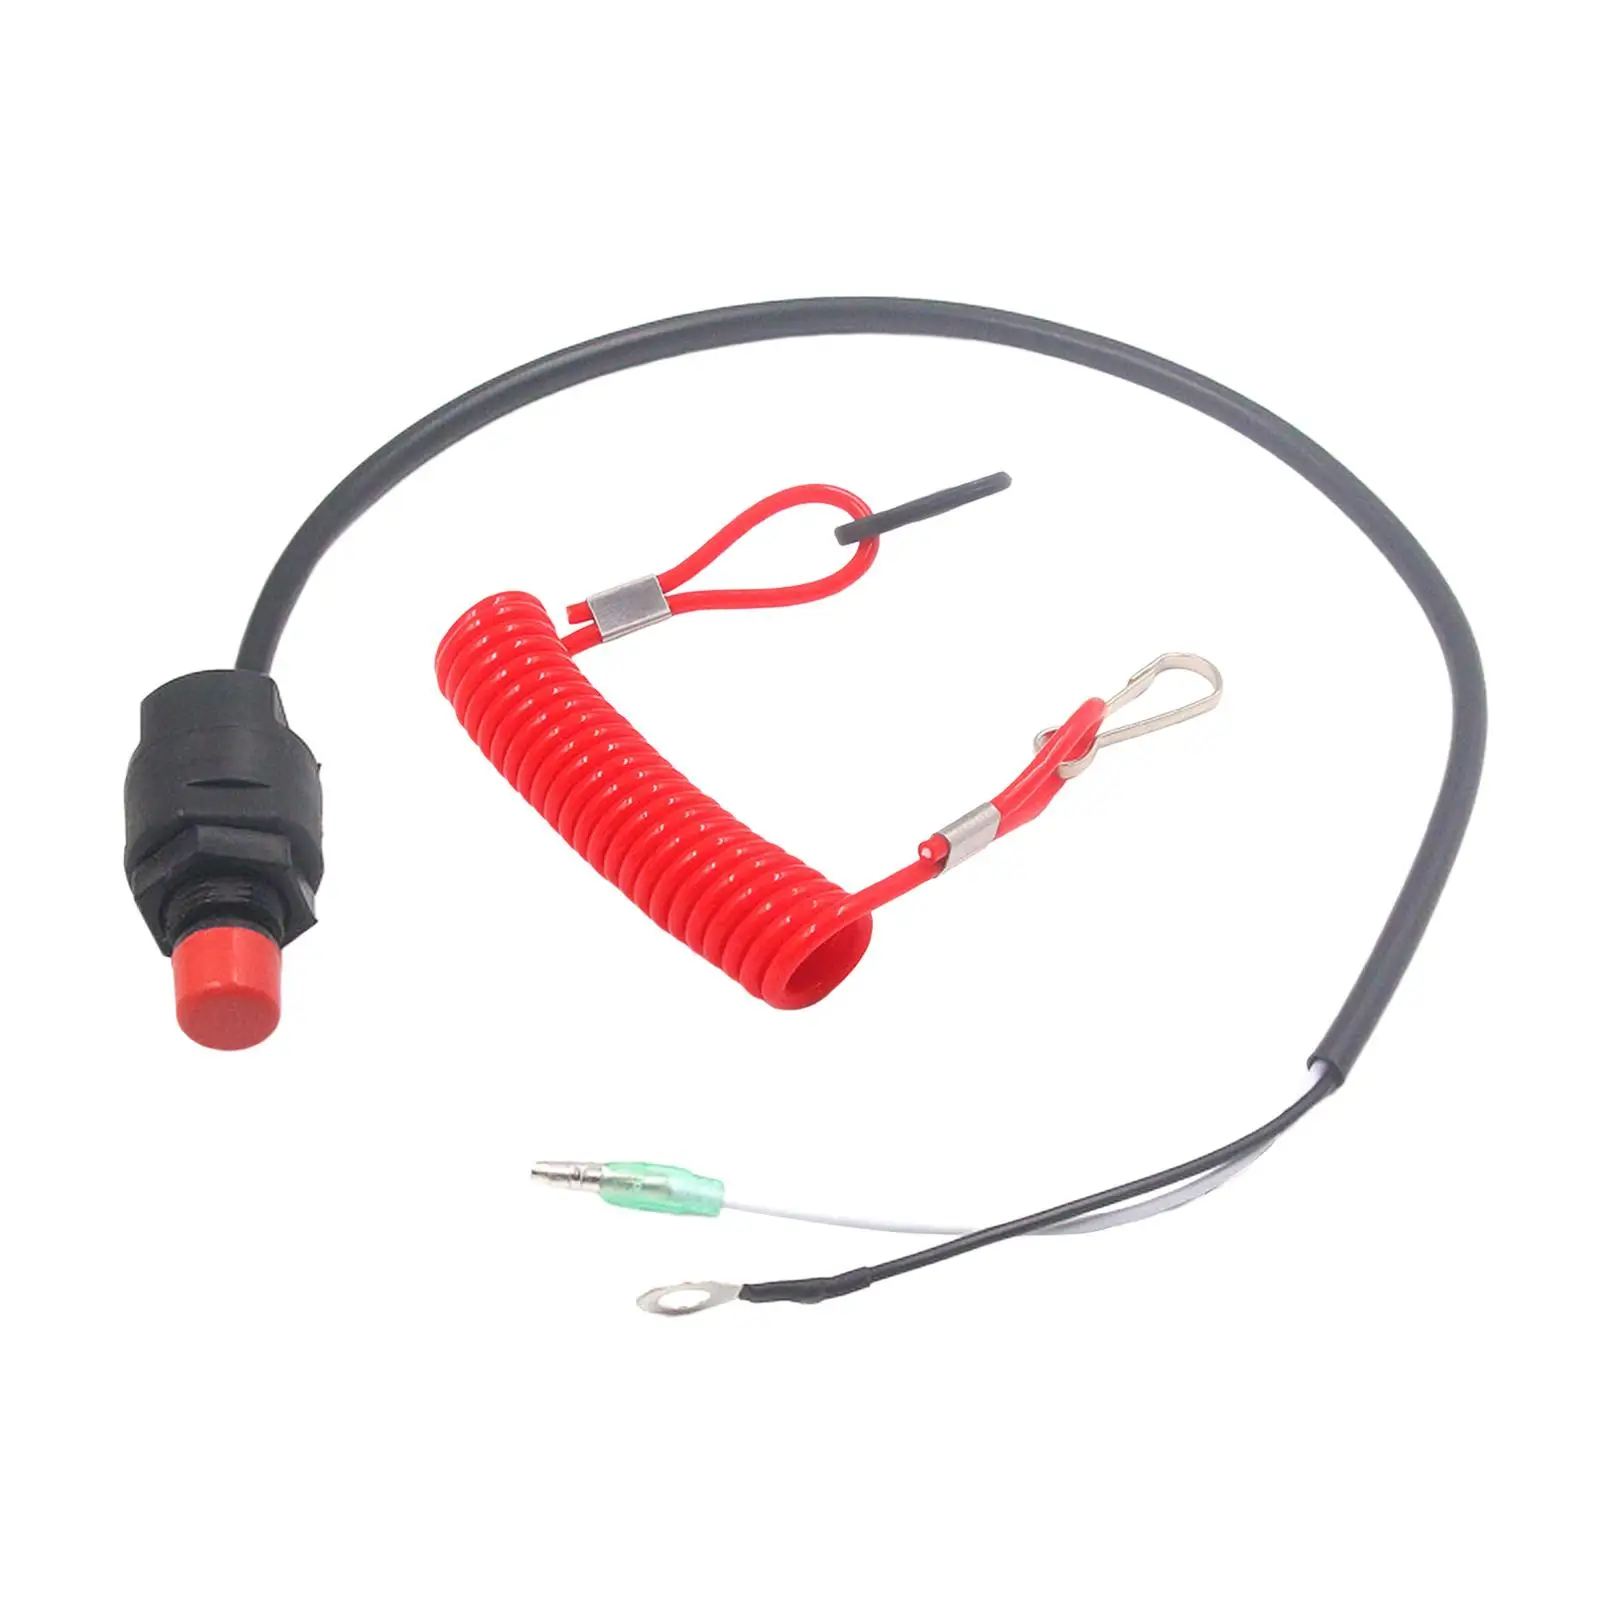 Waterproof On Off Kill Switch Safety Lanyard Flexible Engine Motor Emergency Kill Stop Switch for Boat Outboard Accessory